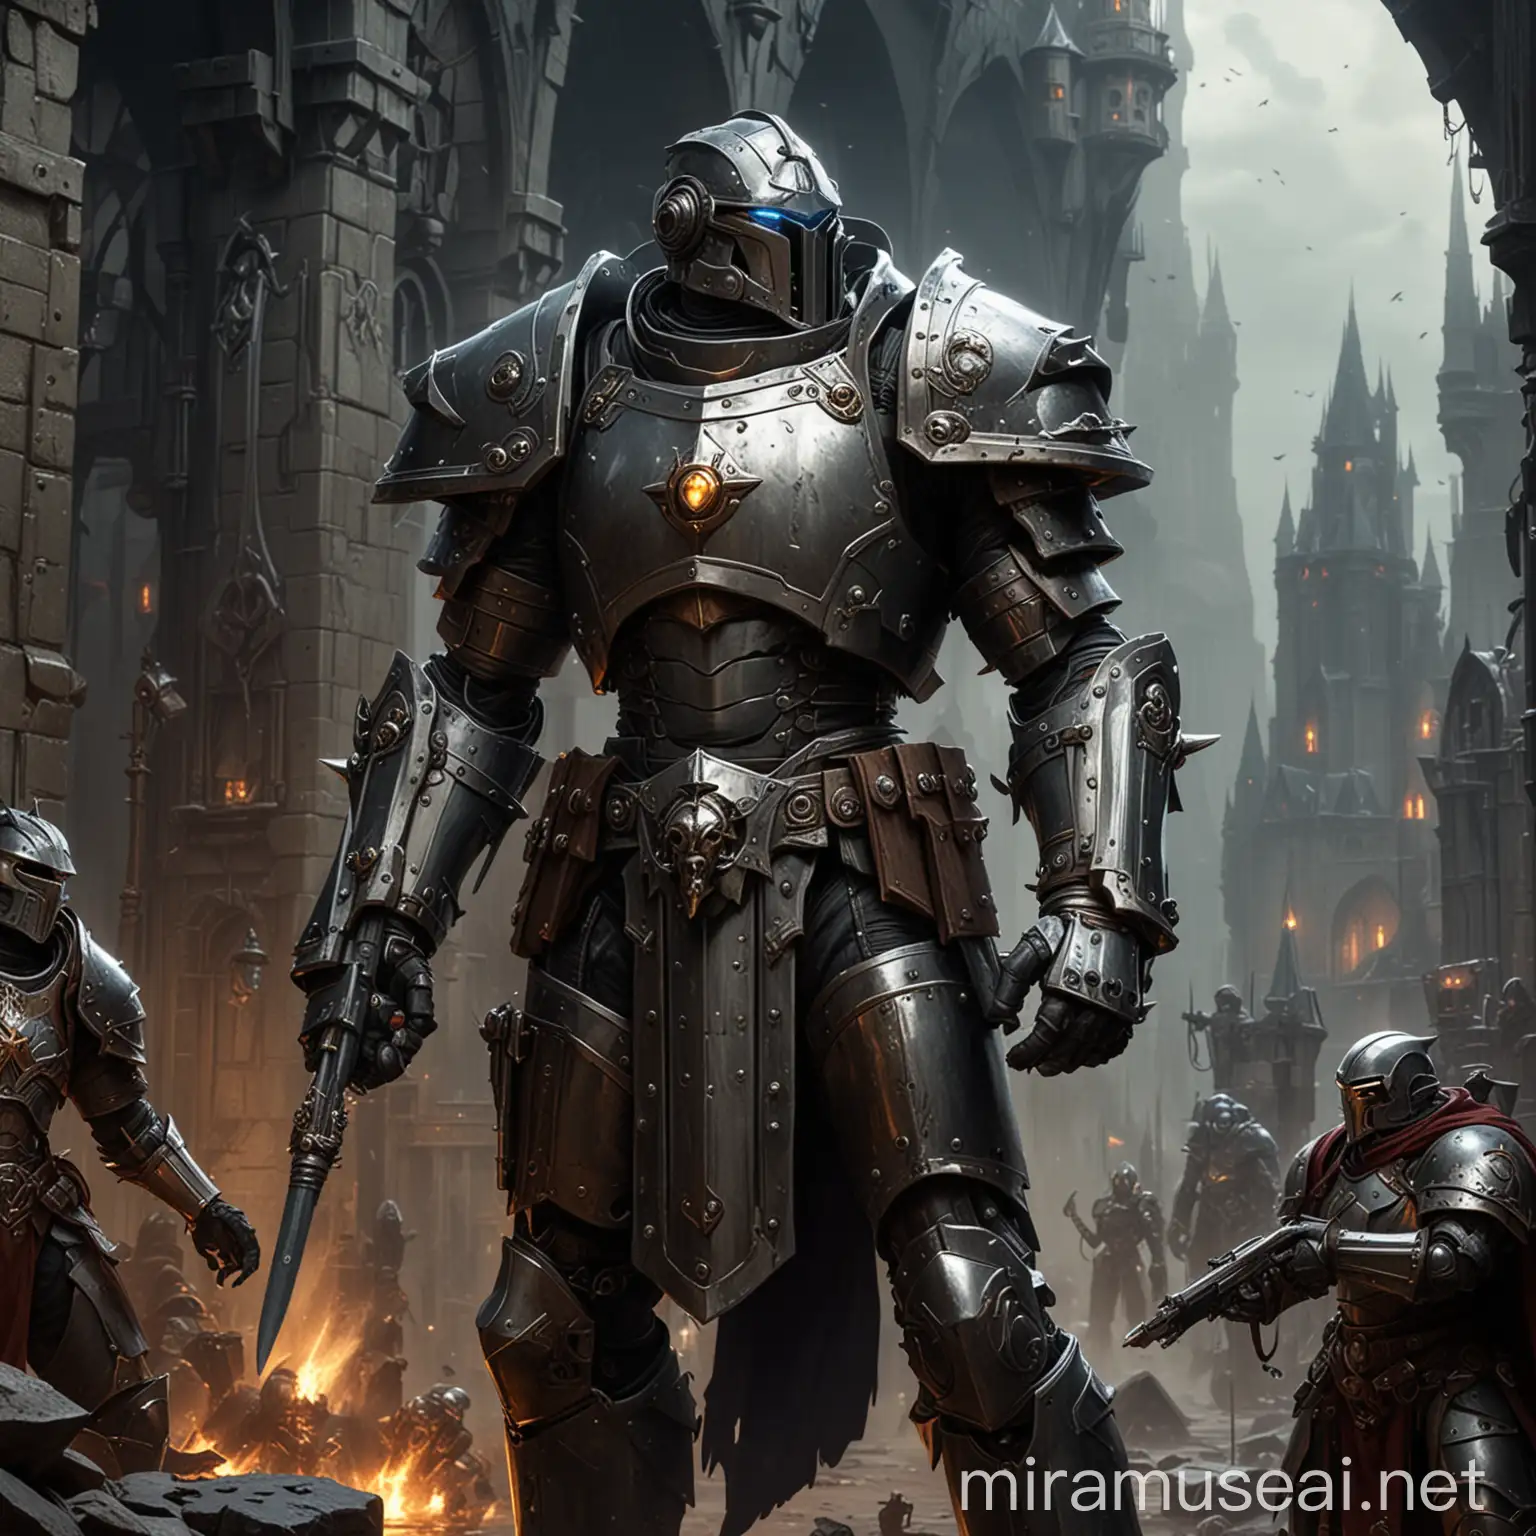 Dungeons and dragons , dark fantasy, Warforged android with a Warhammer and a tower shield